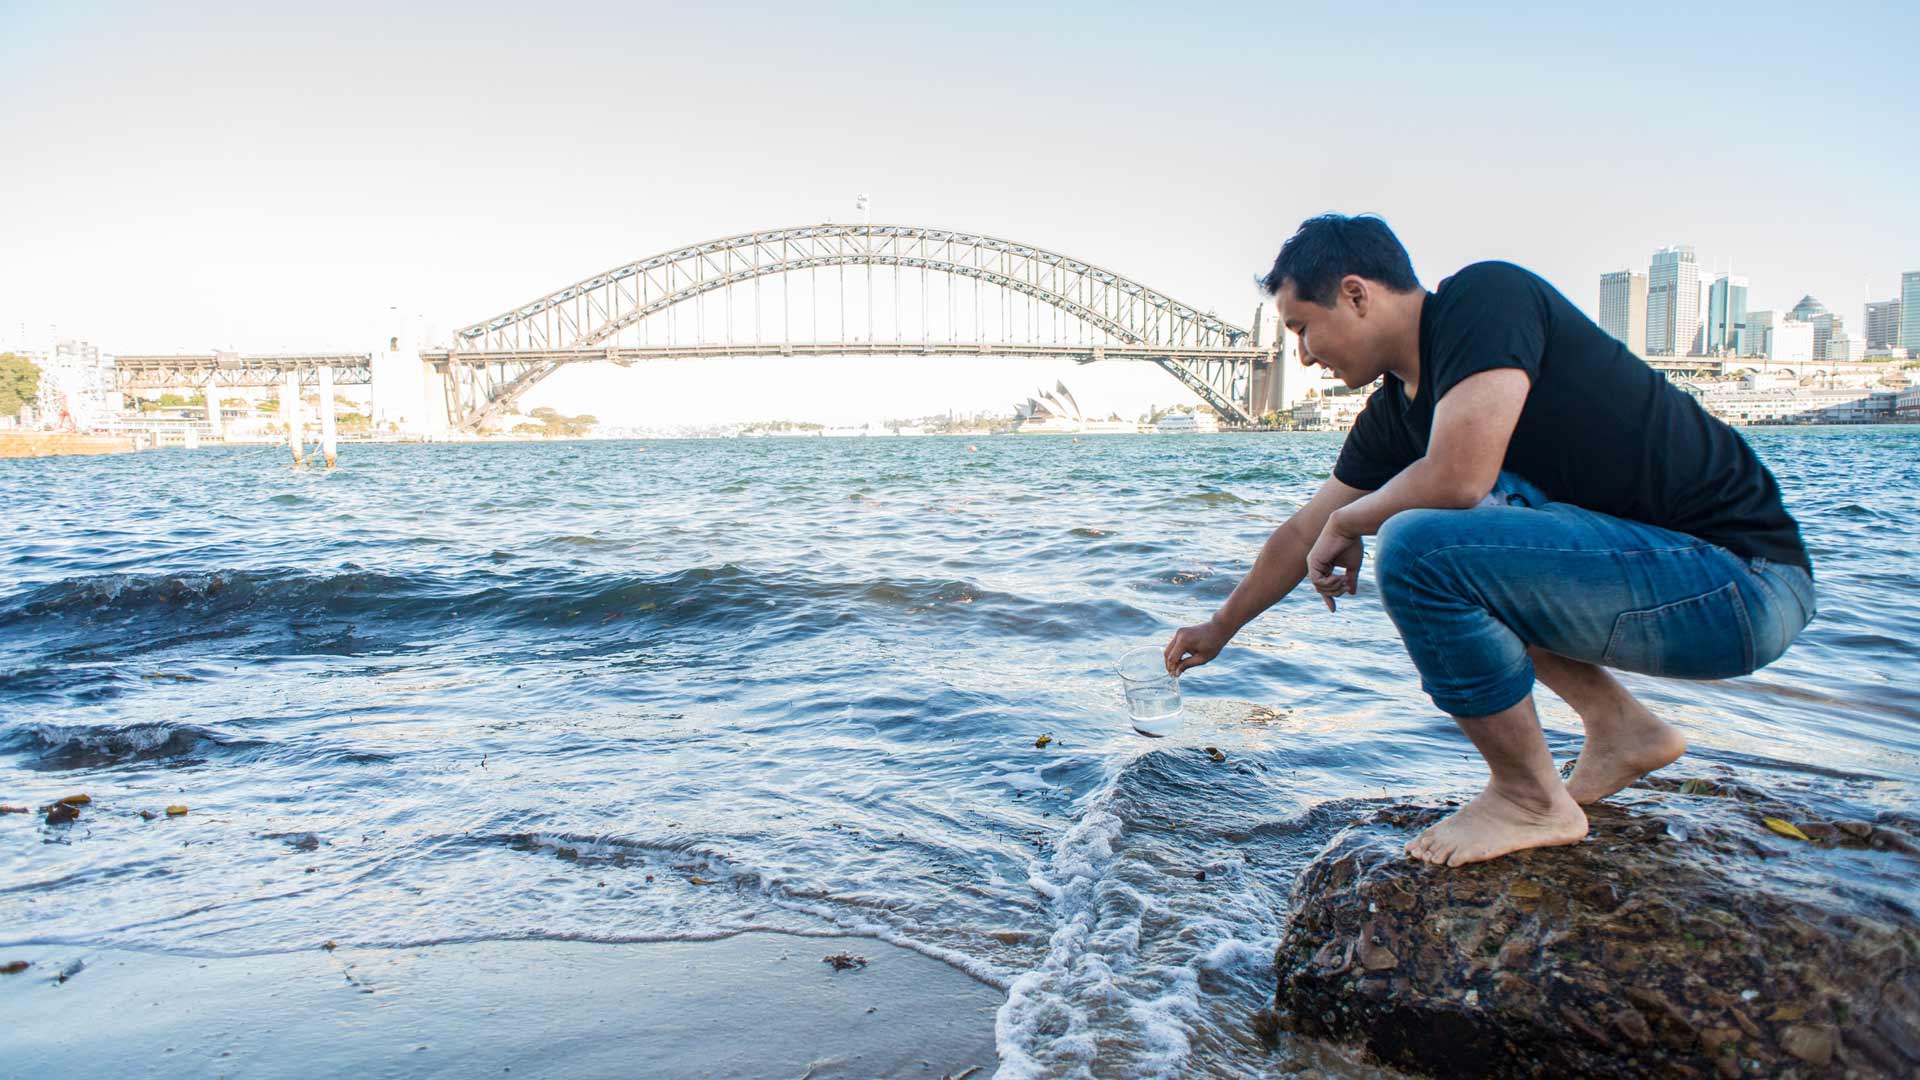 Australian Scientists Have Created a Tiny Filtration Device That Can Make Sydney Harbour Water Drinkable